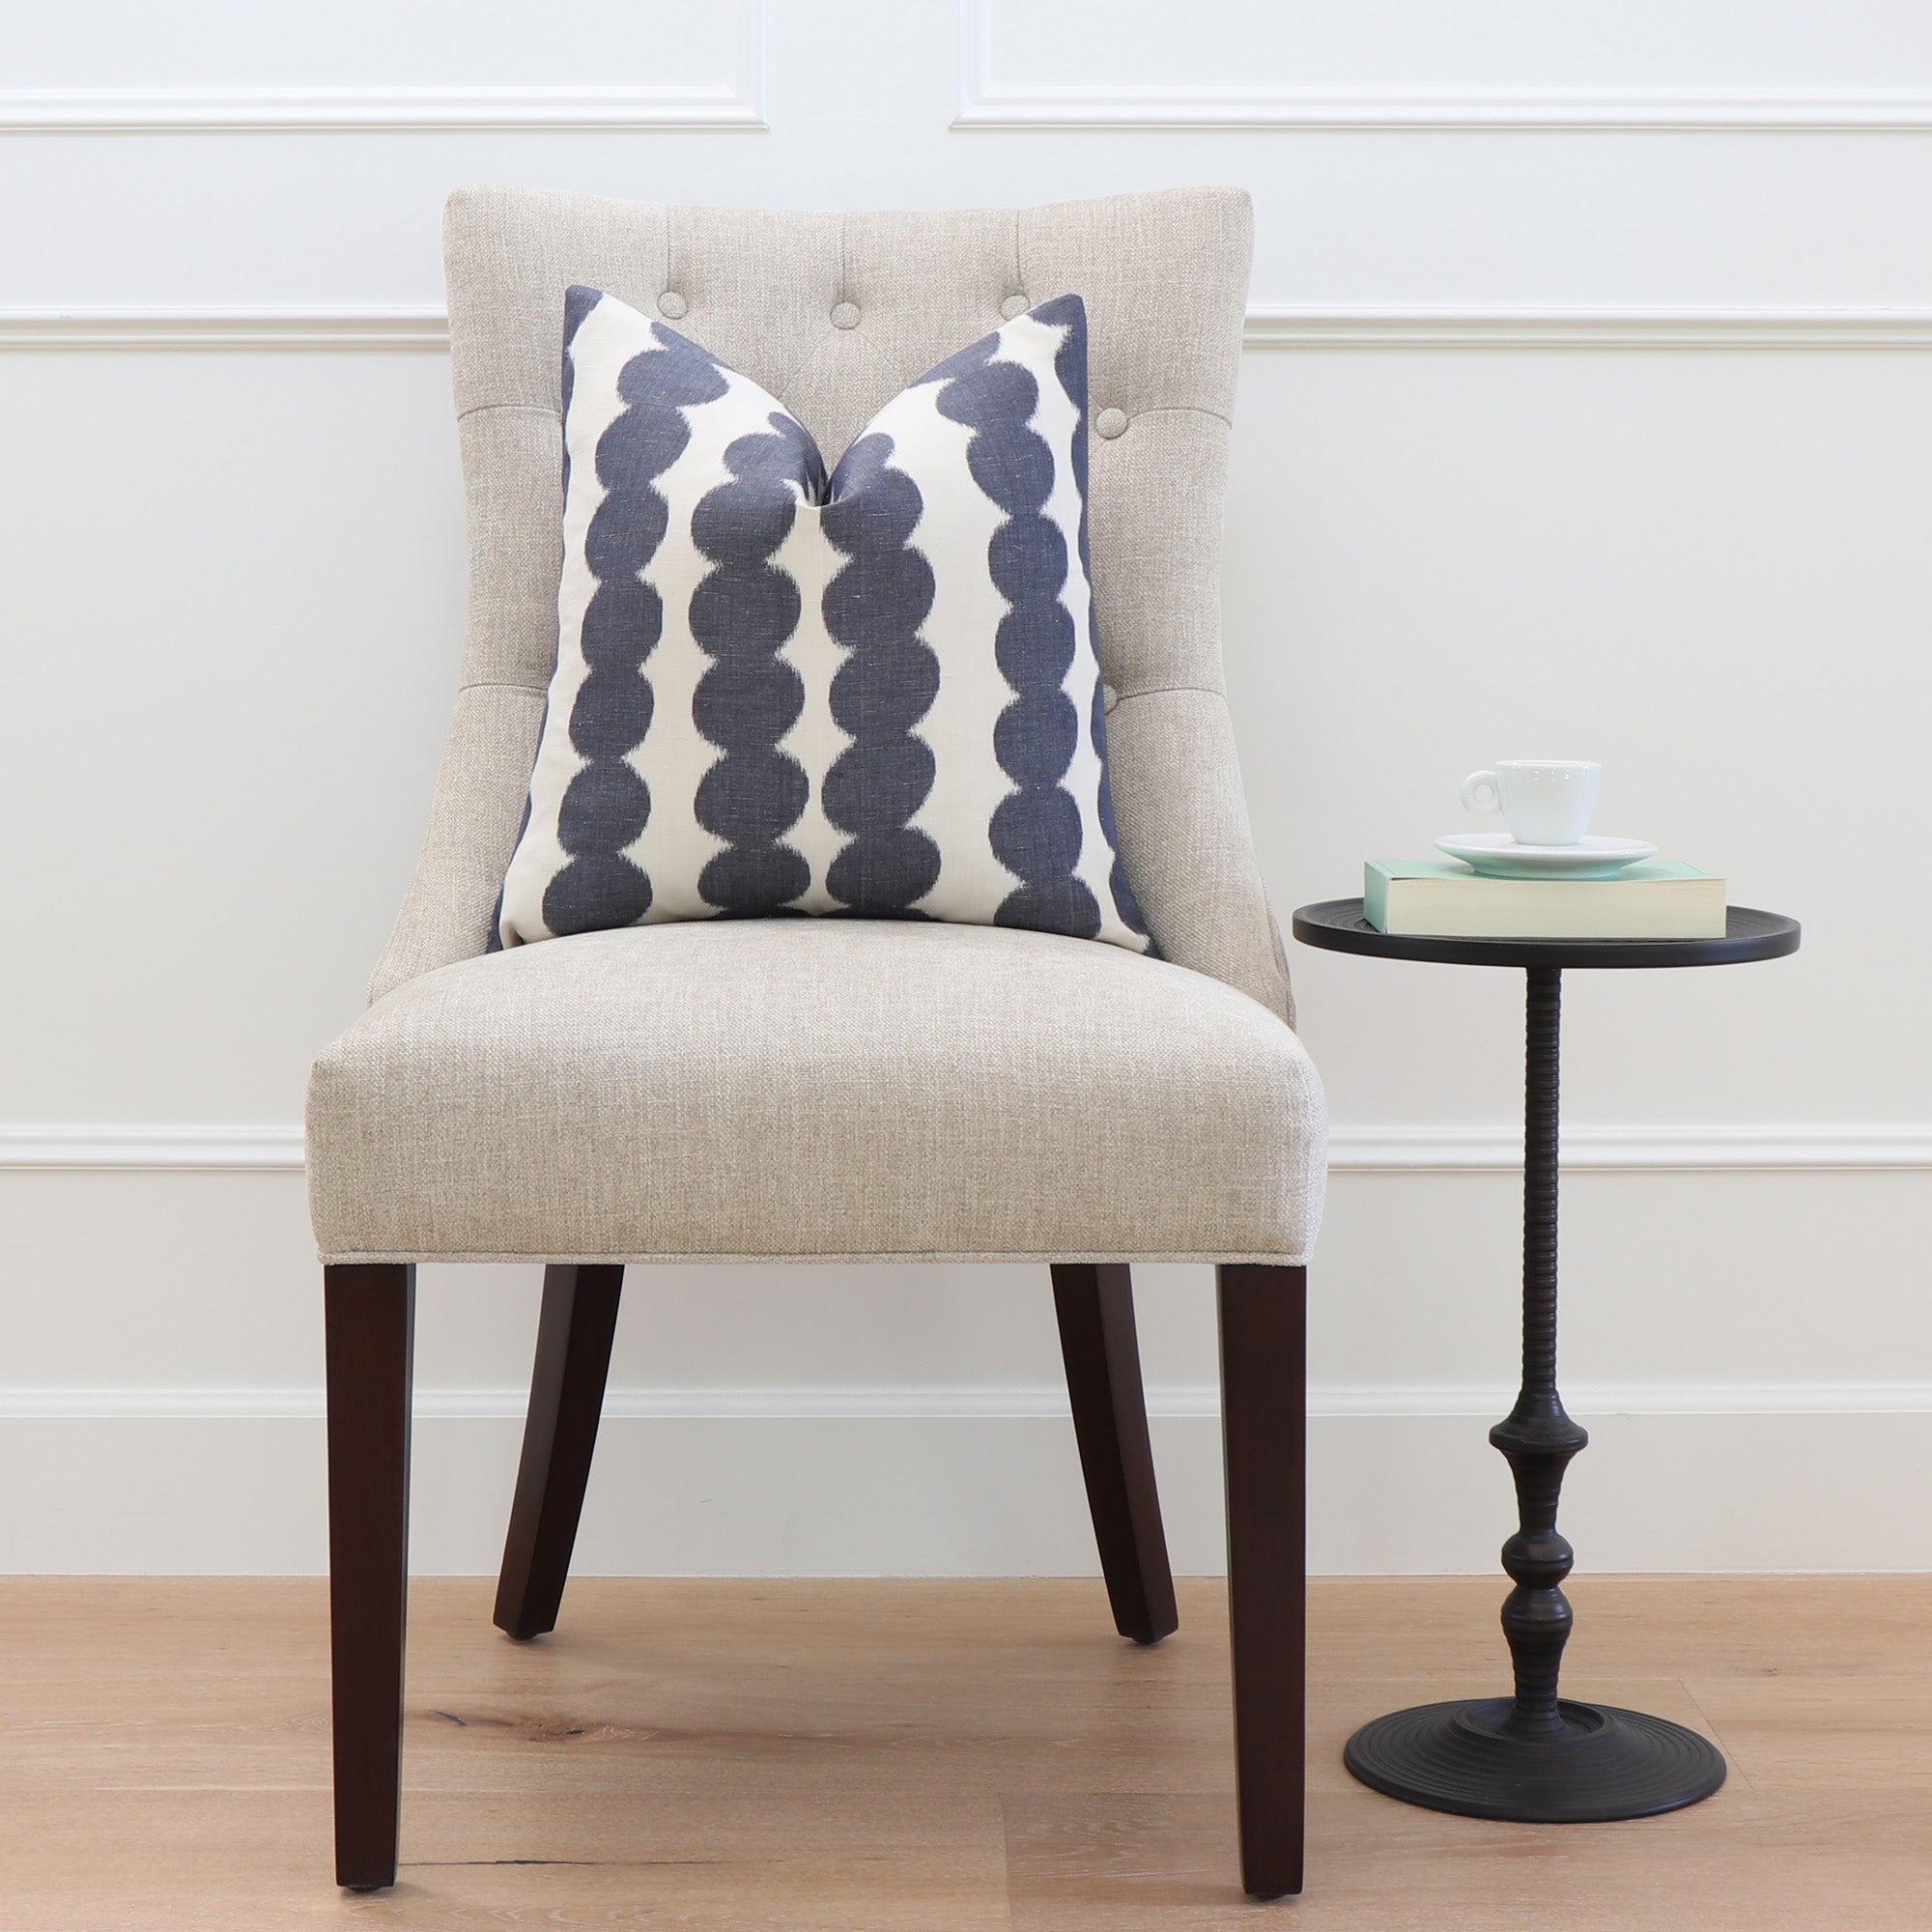 Schumacher Full Circle Navy Blue Pillow Cover on Accent Chair